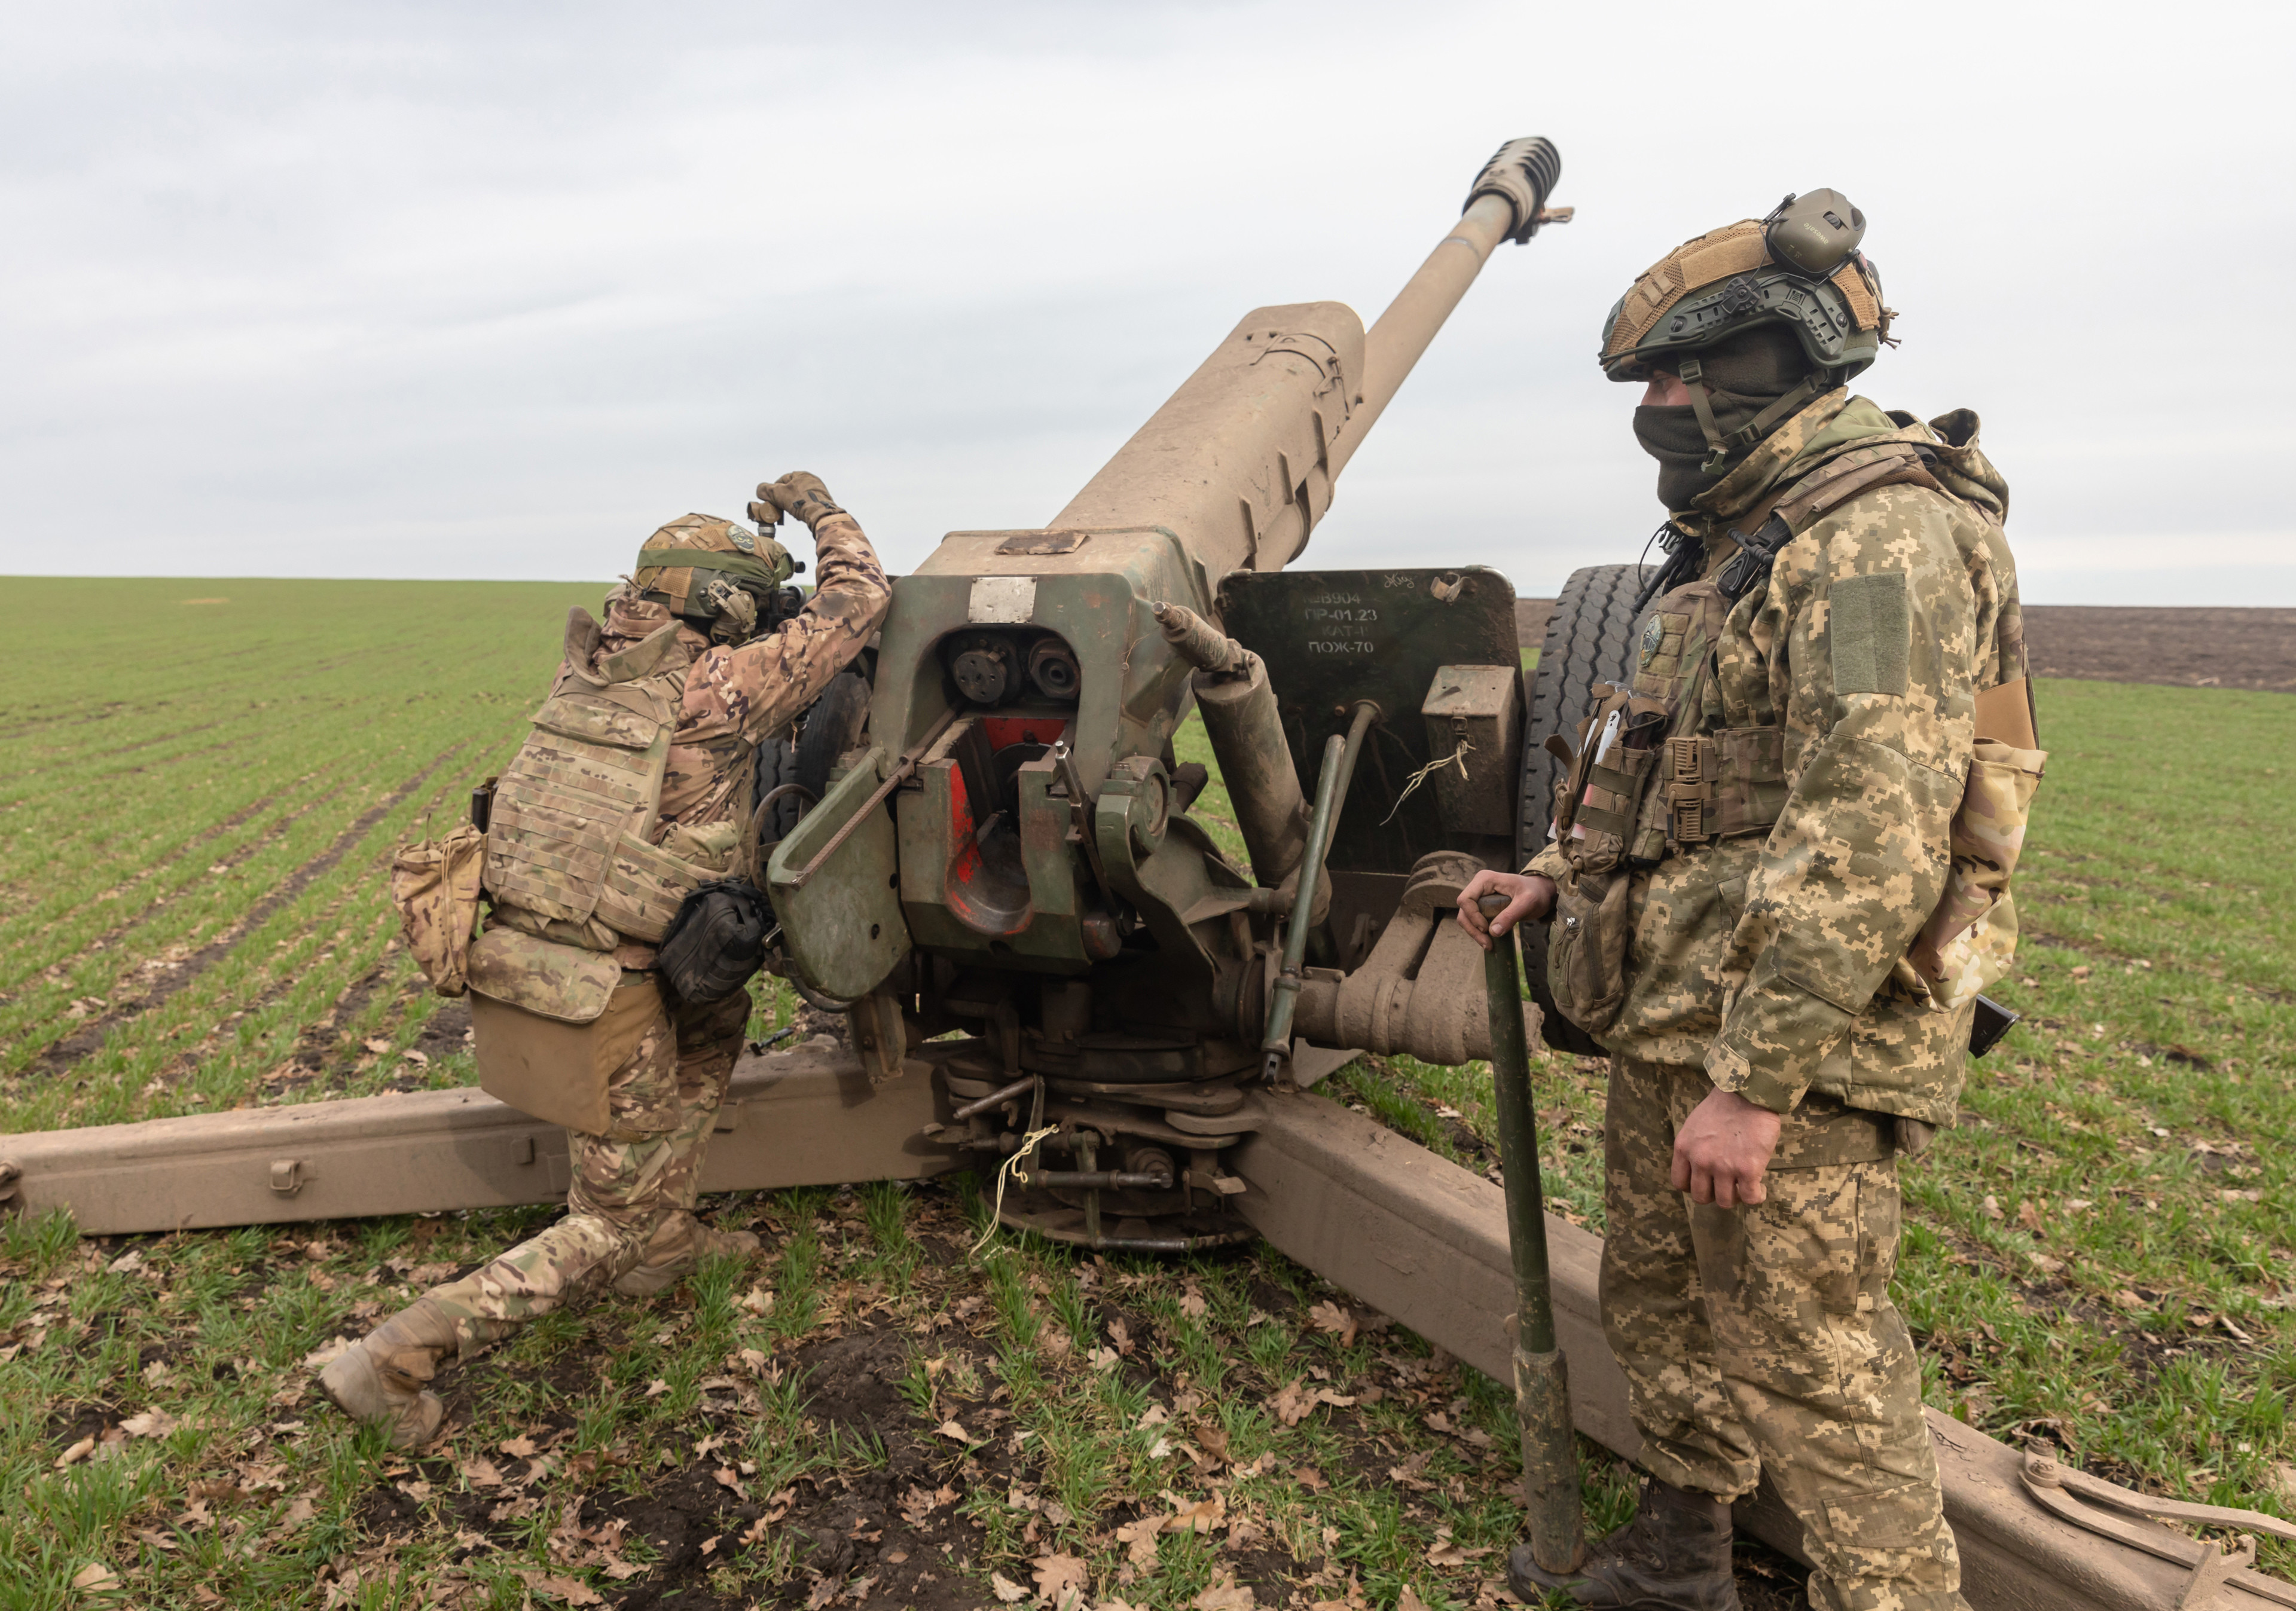 March 21, 2023, Donetsk region, Ukraine: A Ukrainian Armed Forces soldier is seen pointing a 122mm howitzer D-30 at a target before firing. Ukraine's state-owned defense conglomerate, Ukroboronprom, has delivered its first batch of domestically produced 1